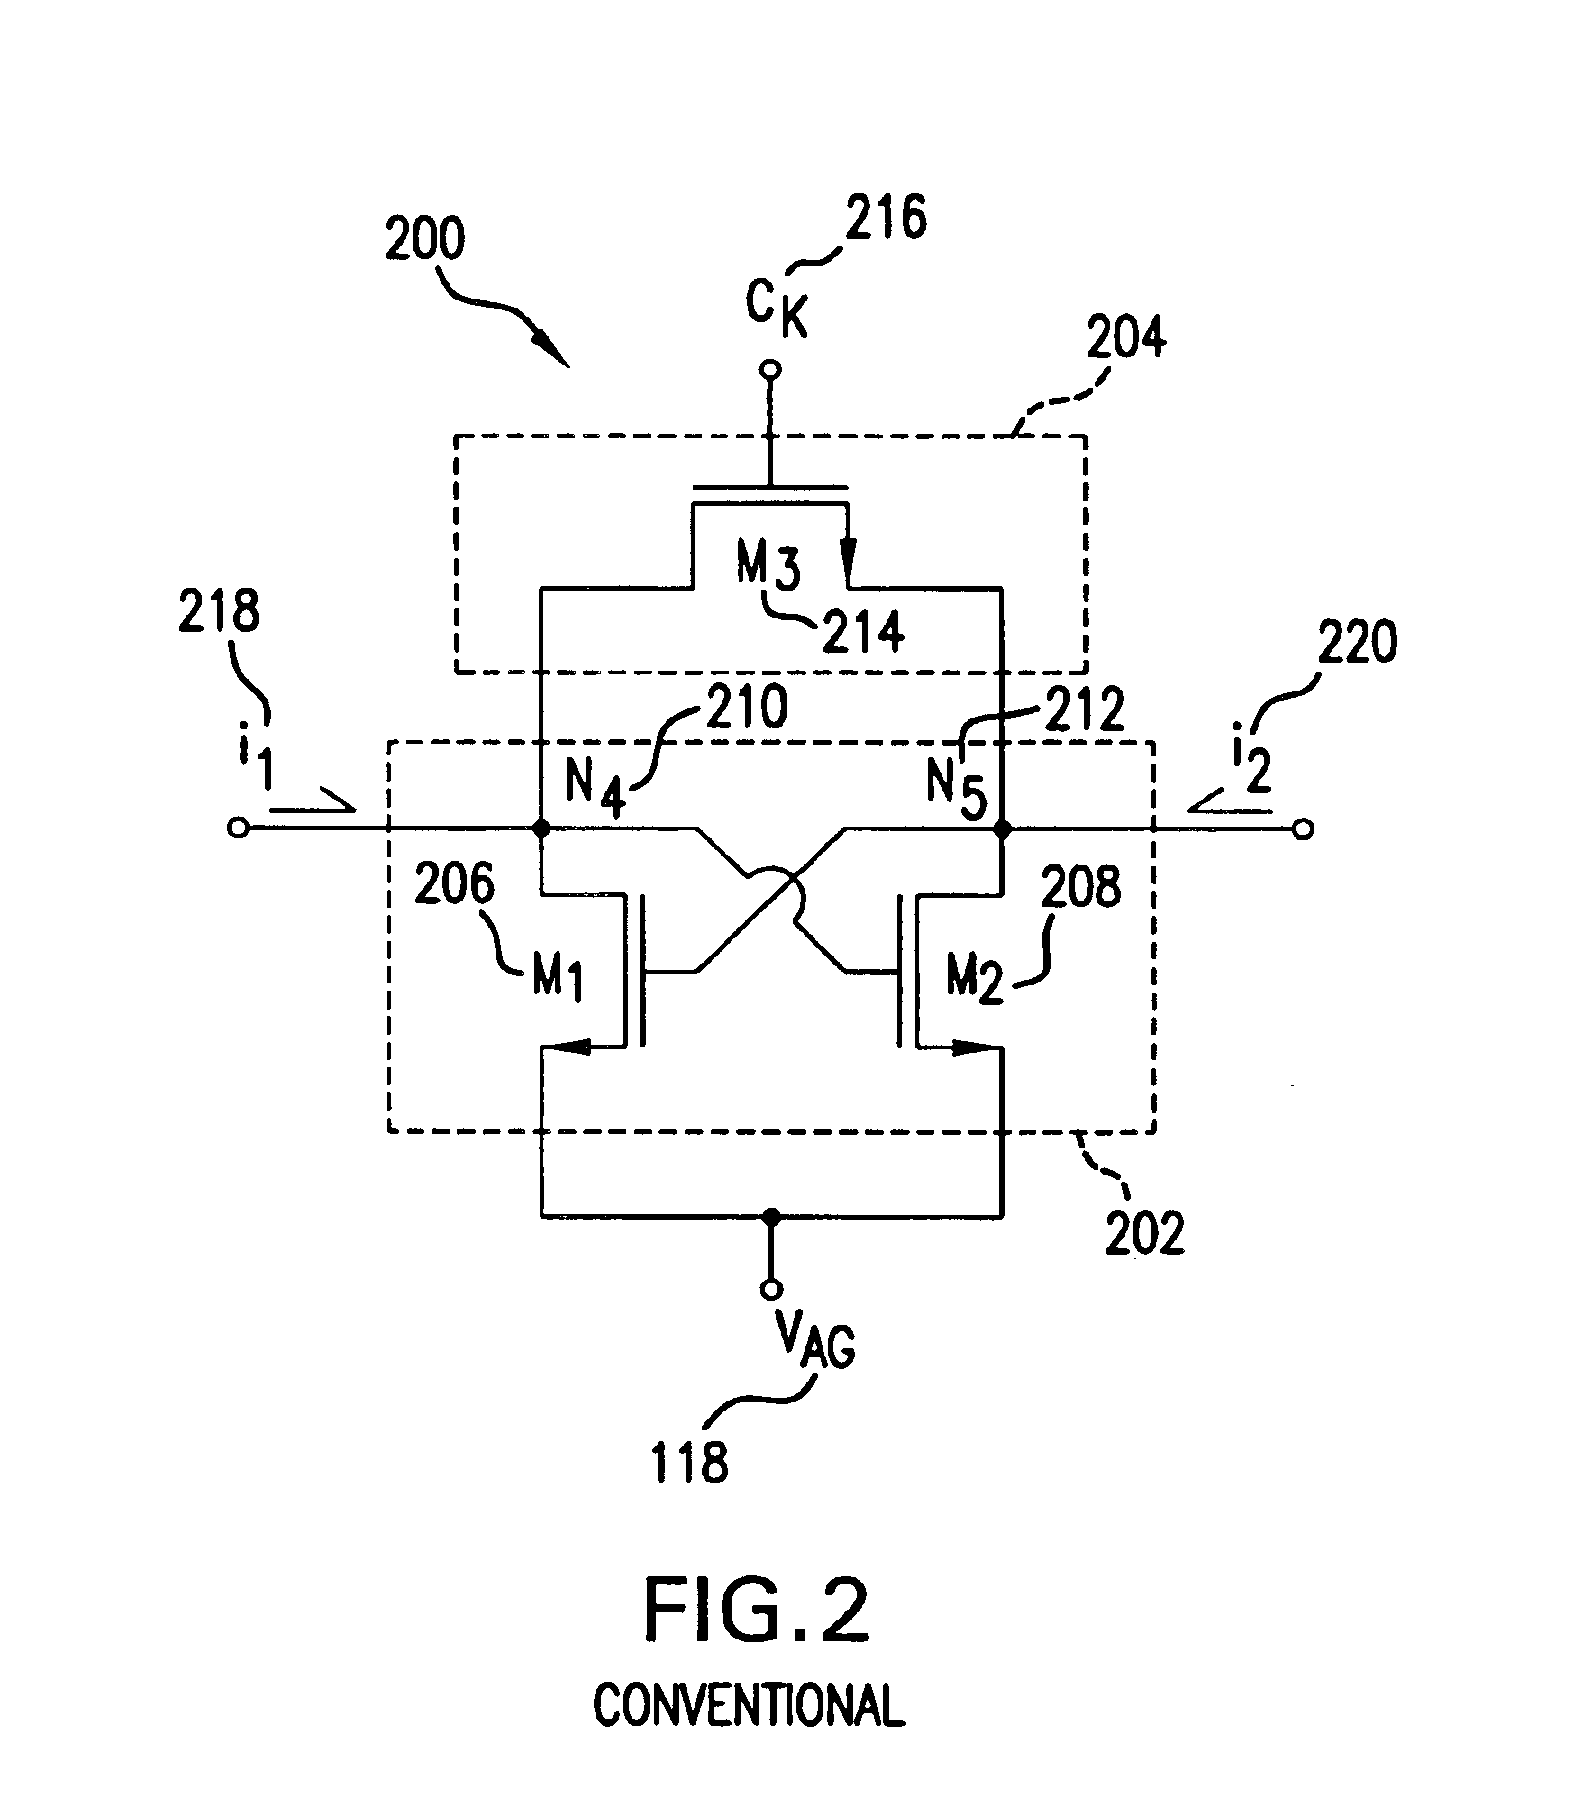 Method for increasing rate at which a comparator in a metastable condition transitions to a steady state